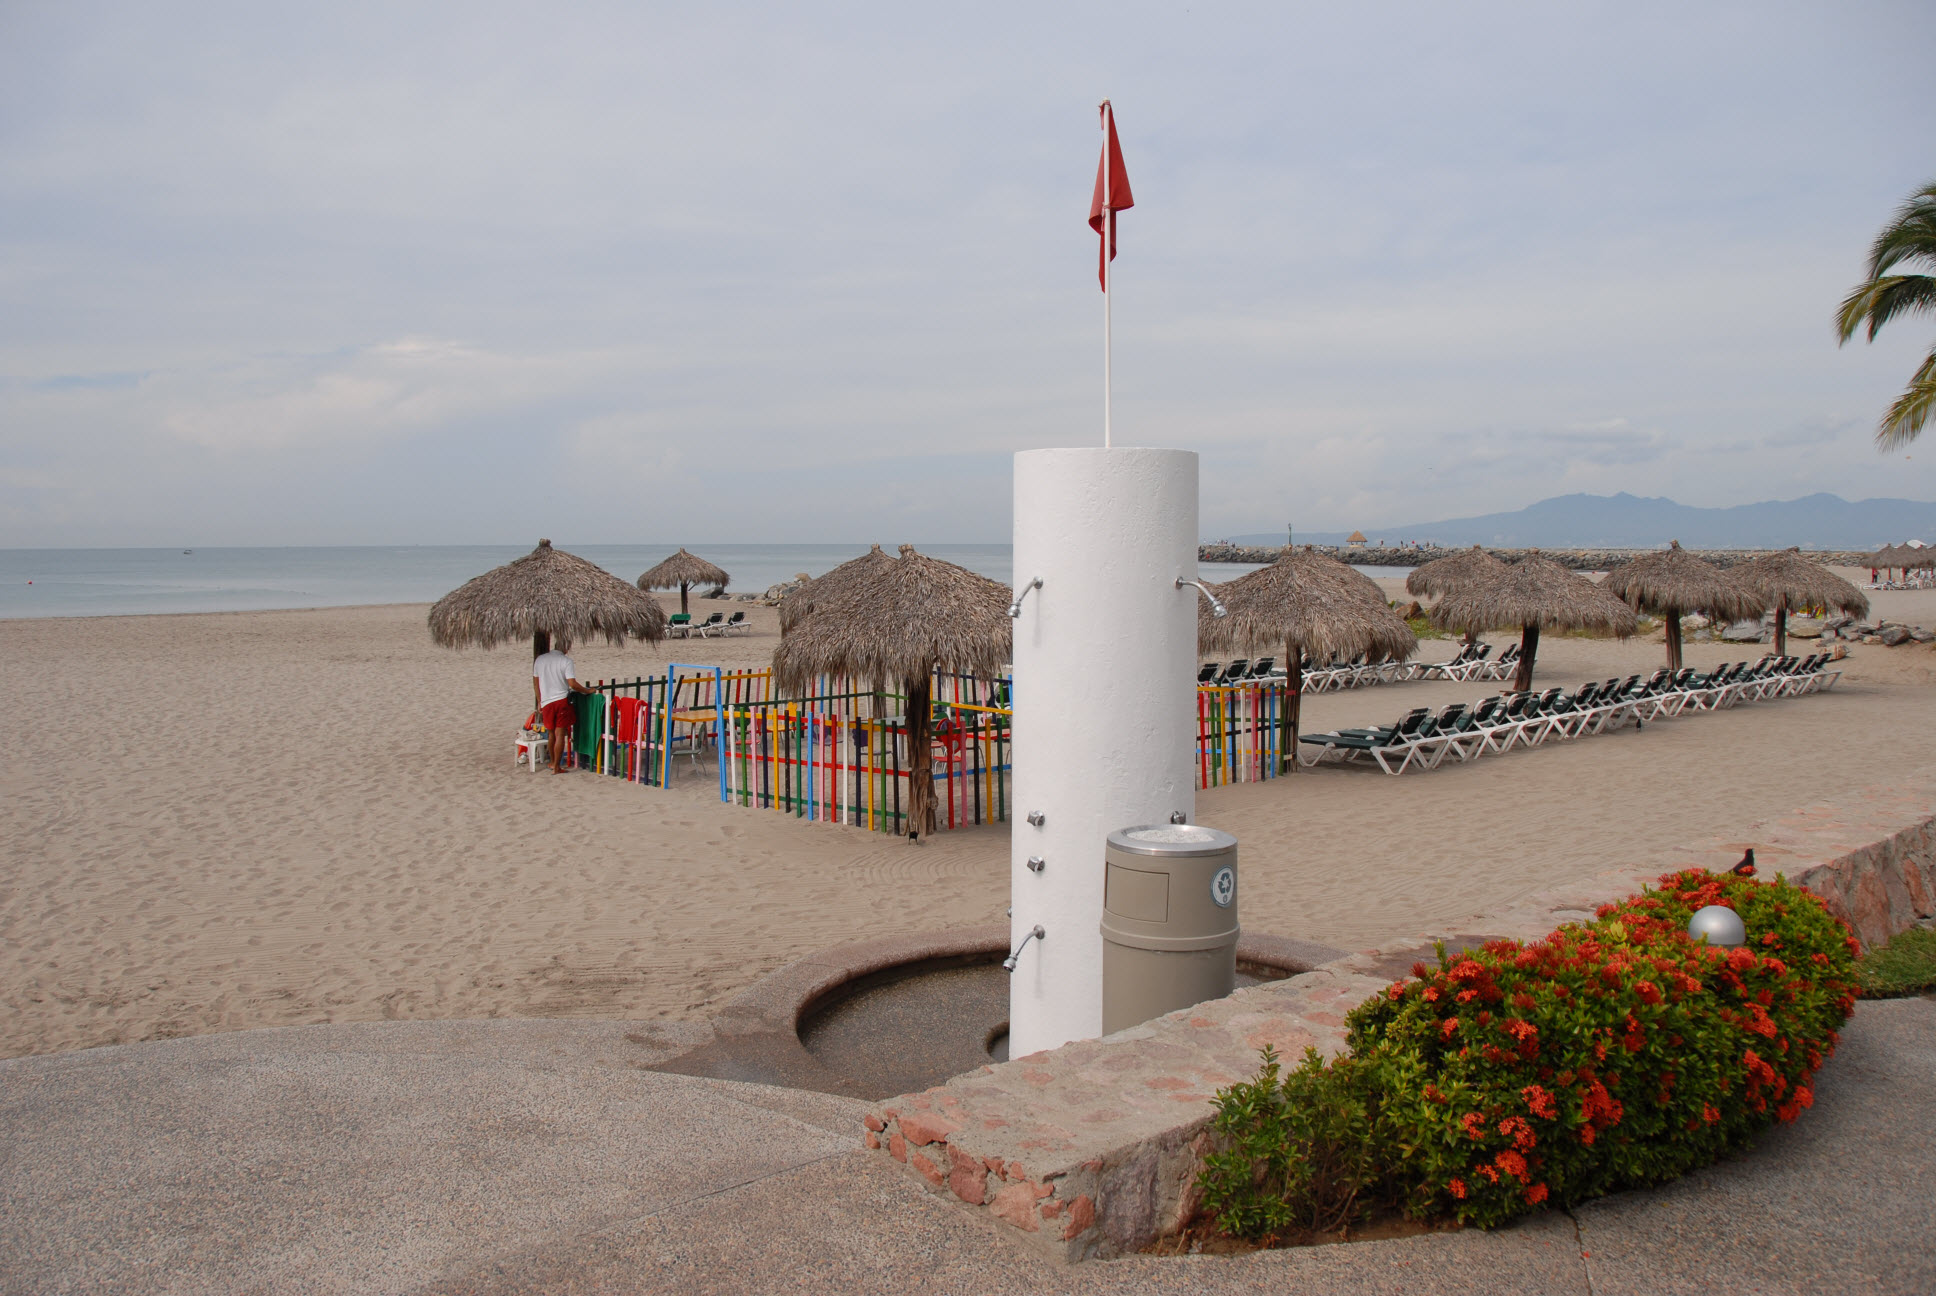 The Sea Garden at Nuevo Vallarta a is steps from the north end of a beach that stretches more than 1.5 miles when the tide is out.  The beach is clean and water is swimmable.  Also, the resort is close to many fine restaurants and public transportation.